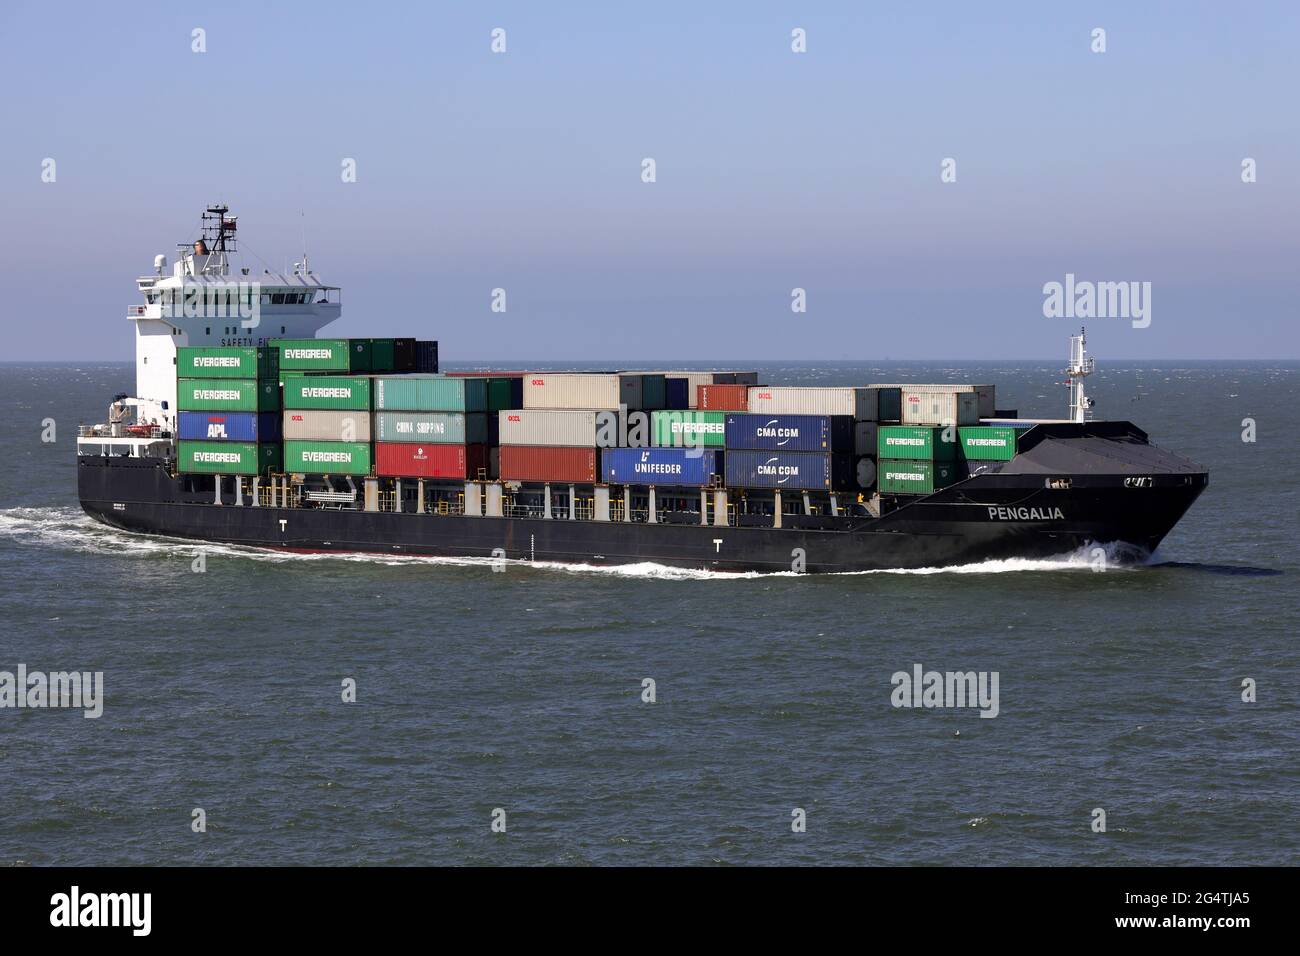 The container ship Pengalia will reach the port of Rotterdam on May 29, 2021. Stock Photo